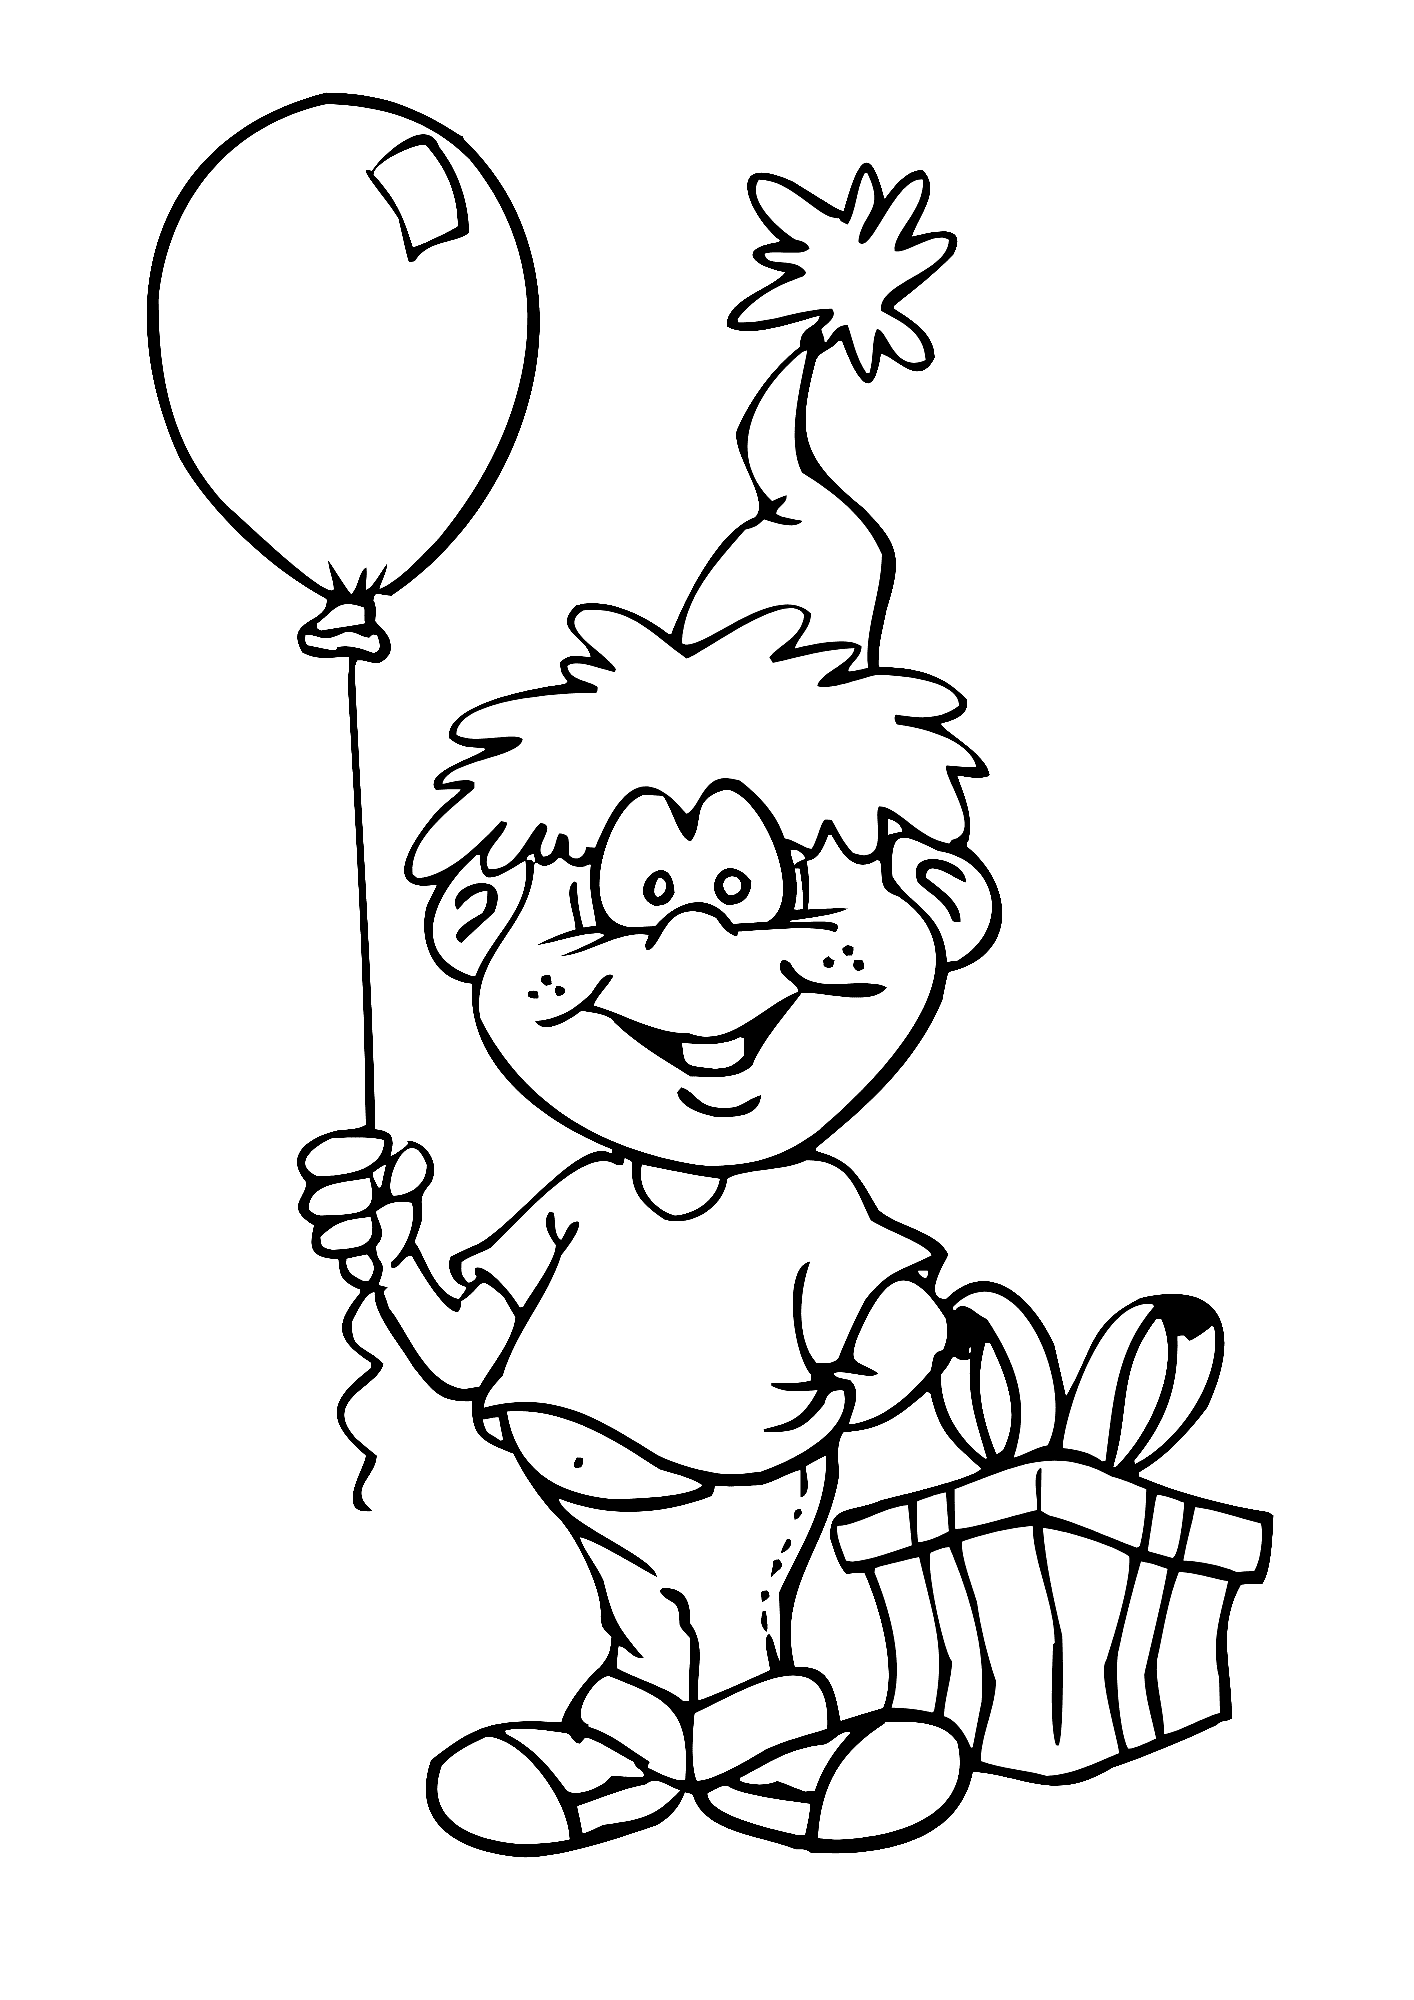 Happy Birthday Boy Painting Coloring Page